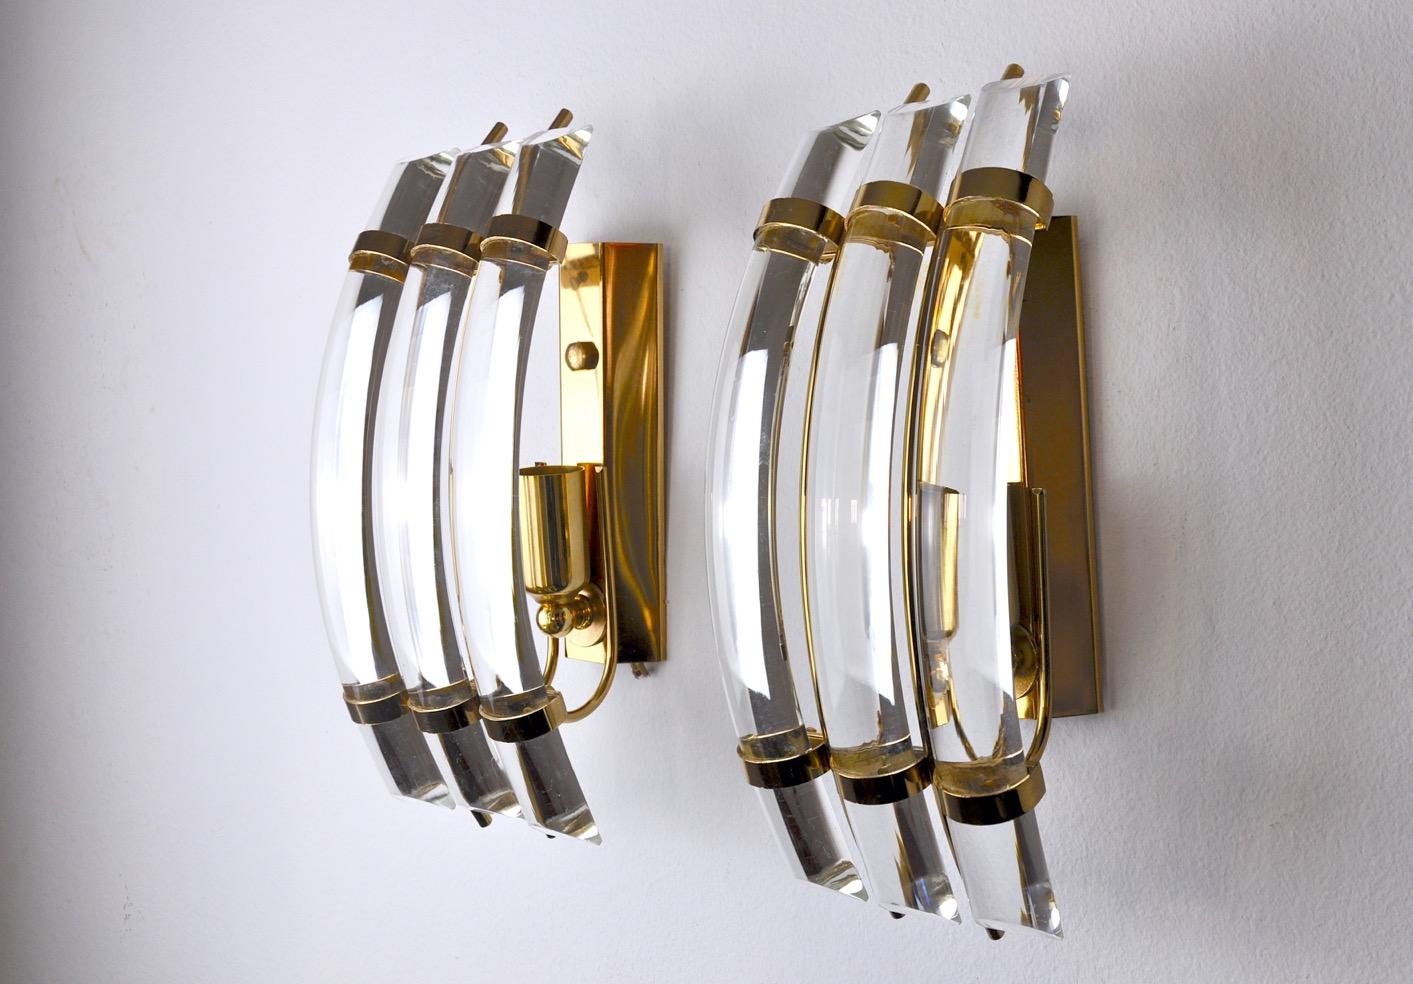 Hollywood Regency Pair of Venini Sconces, Italy, 1970 For Sale